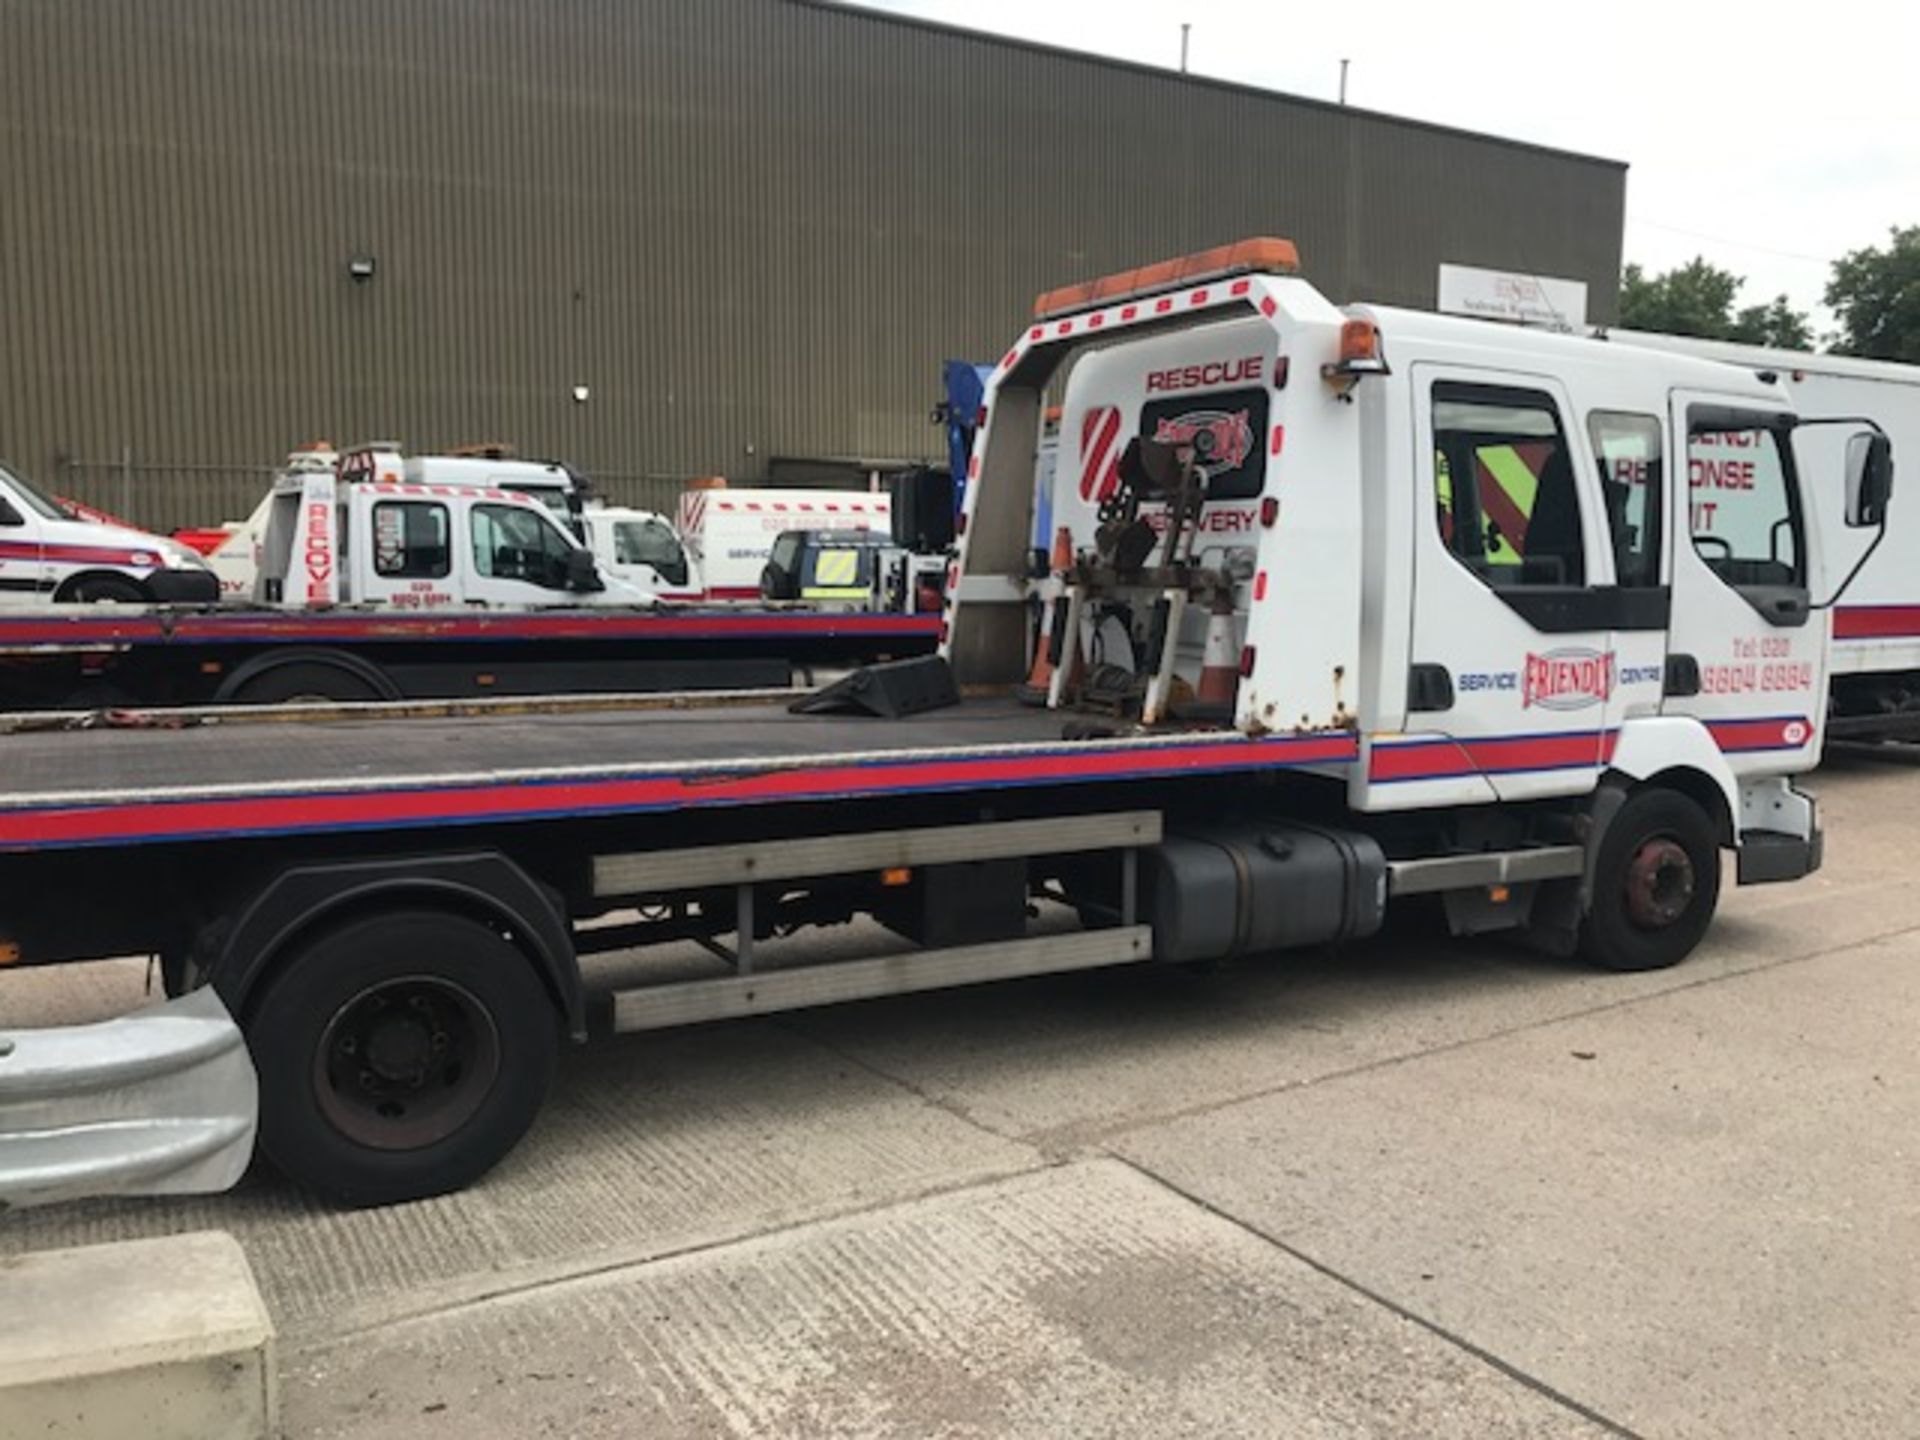 2002 Renault Midlum 10T crew cab breakdown recovery vehicle complete with winch and built in - Image 4 of 13